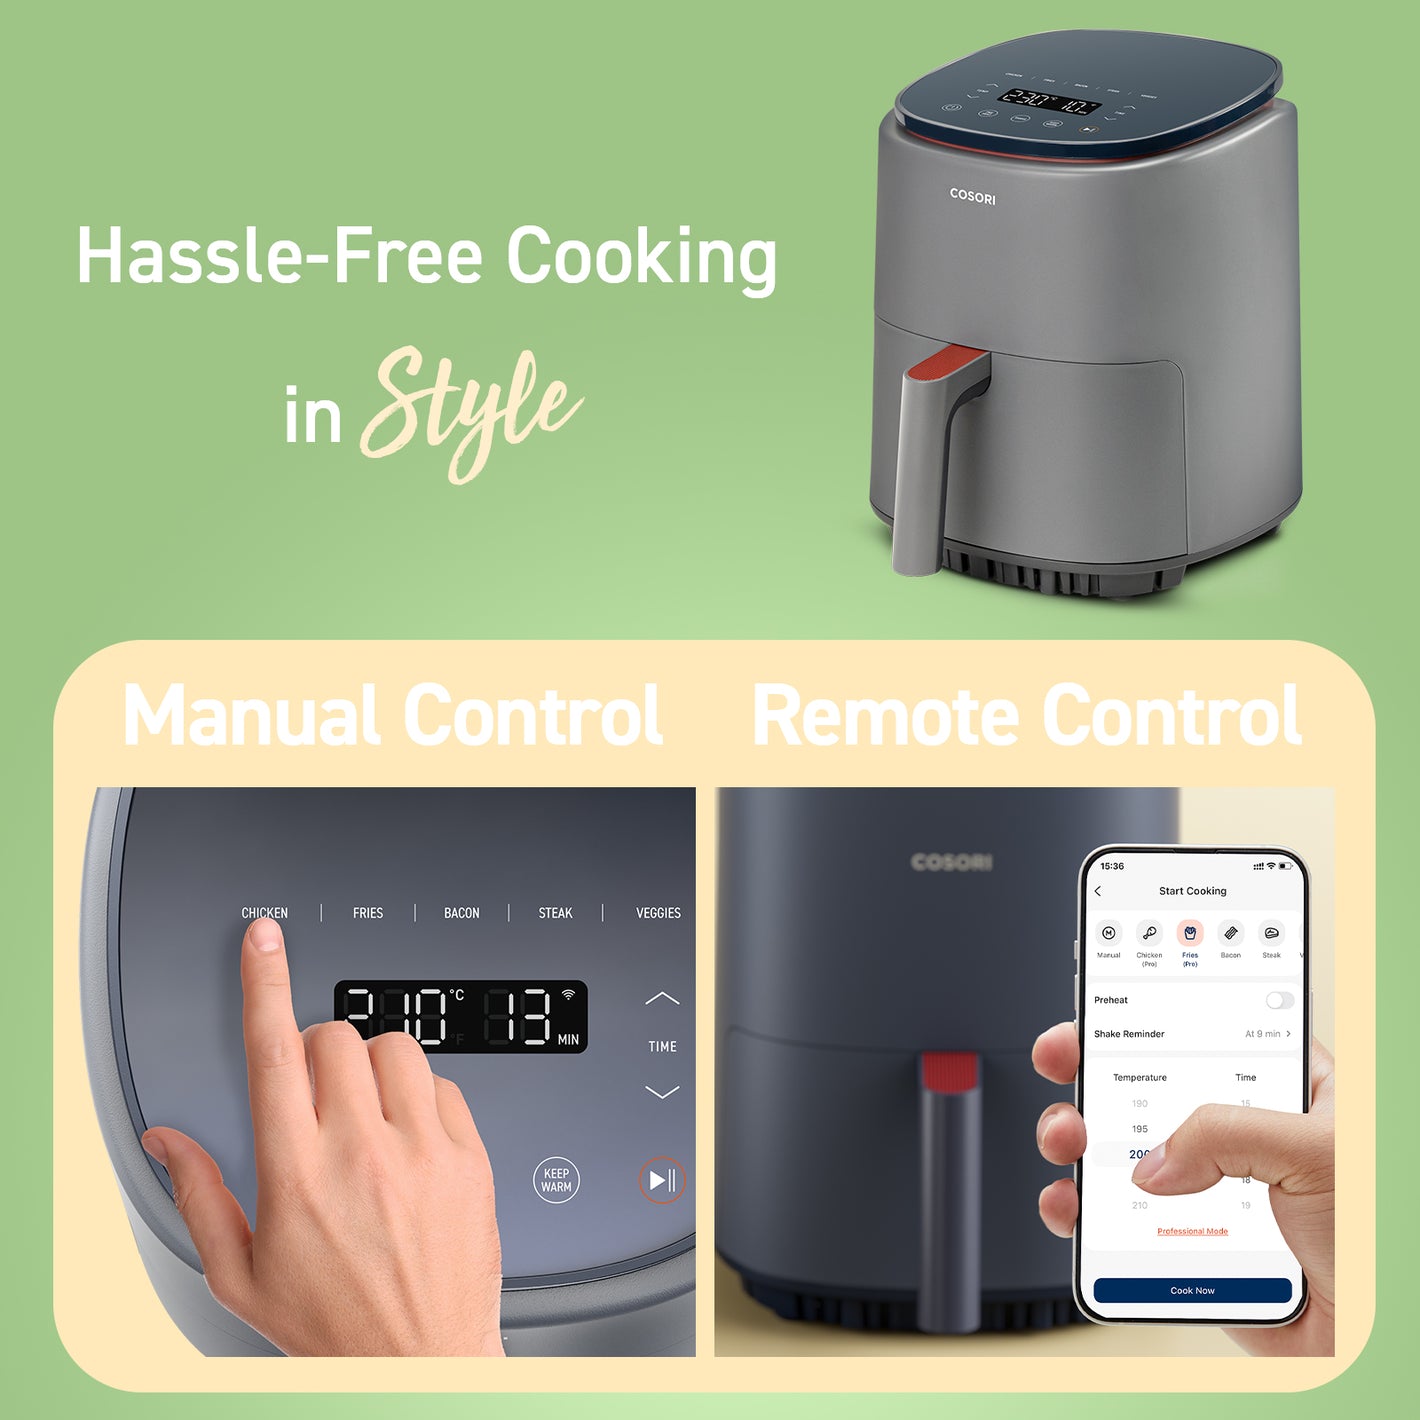 Hassle-Free Cooking in Style Manual Control Remote Control